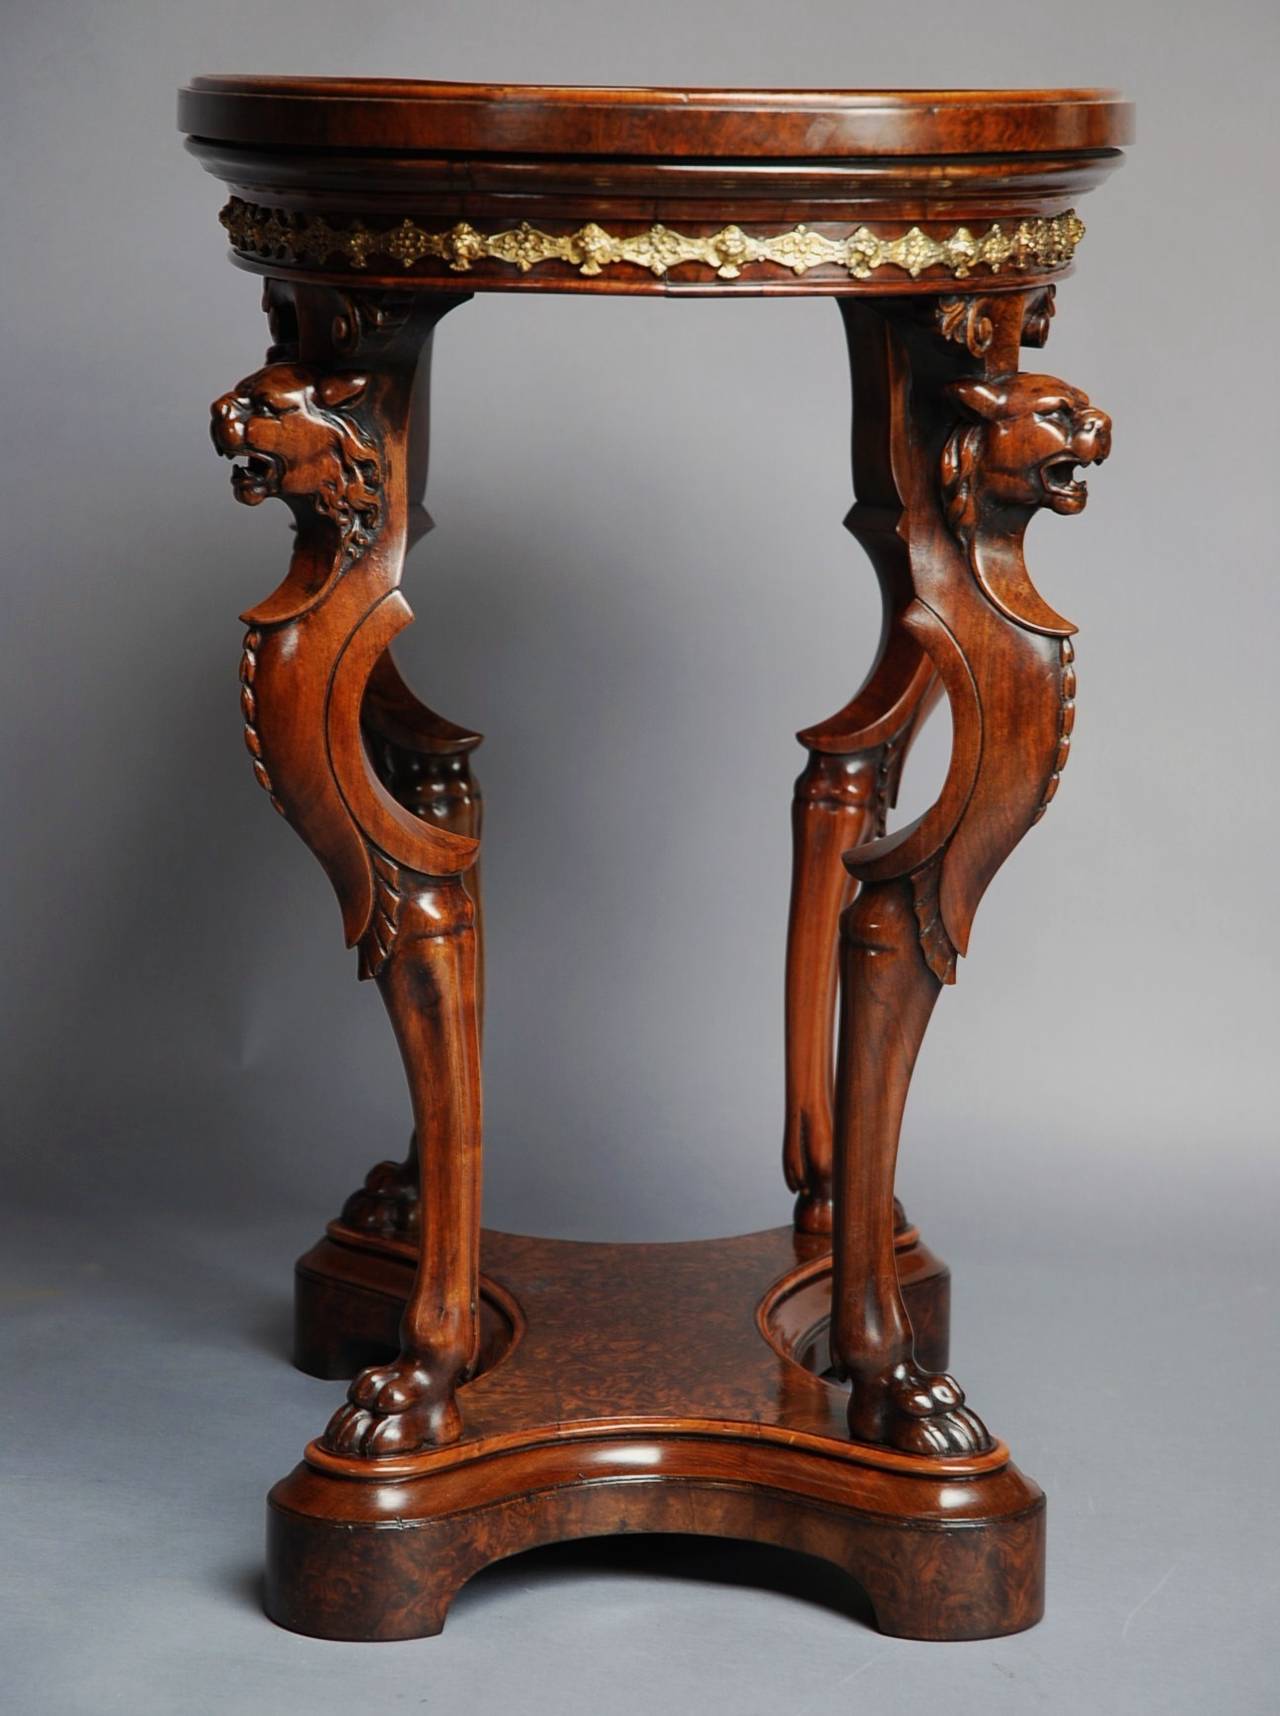 Boxwood Mid-19th Century Burr Walnut Centre Table by Holland & Sons